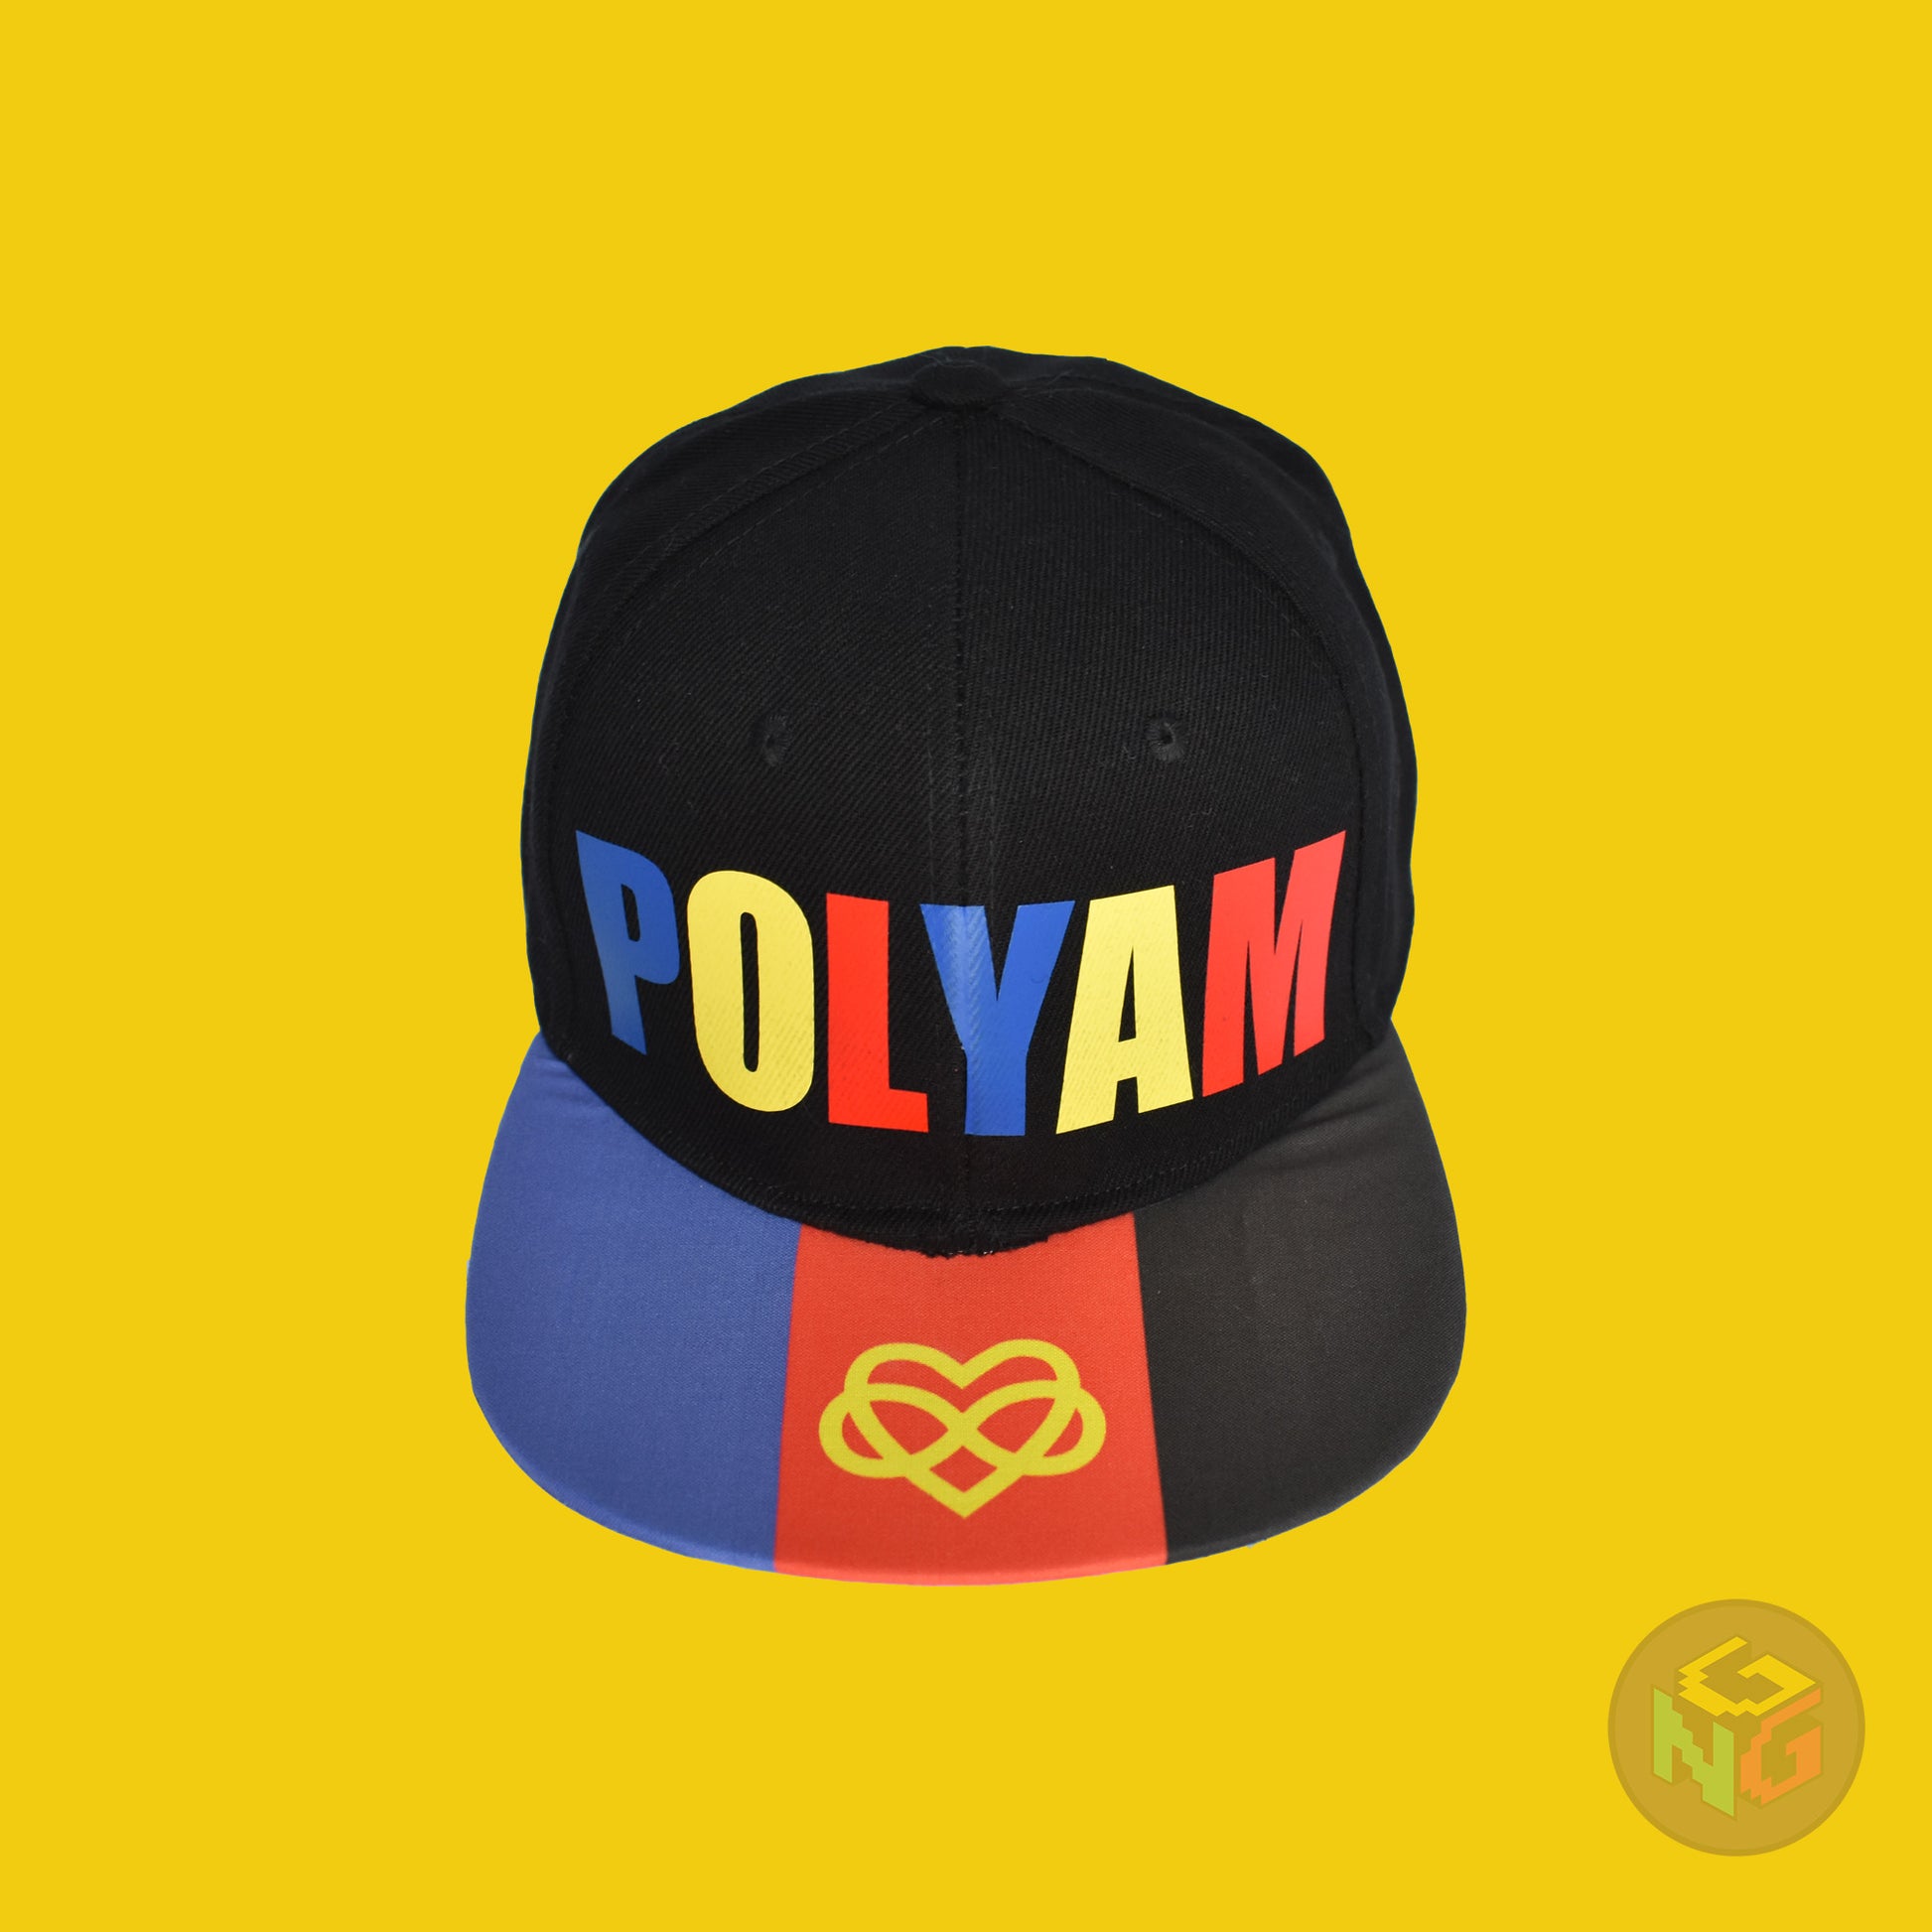 Black flat bill snapback hat. The brim has the polyamory pride flag with the heart infinity symbol on both sides and the front of the hat has the word “POLYAM” in red, yellow, and blue letters. Front top view